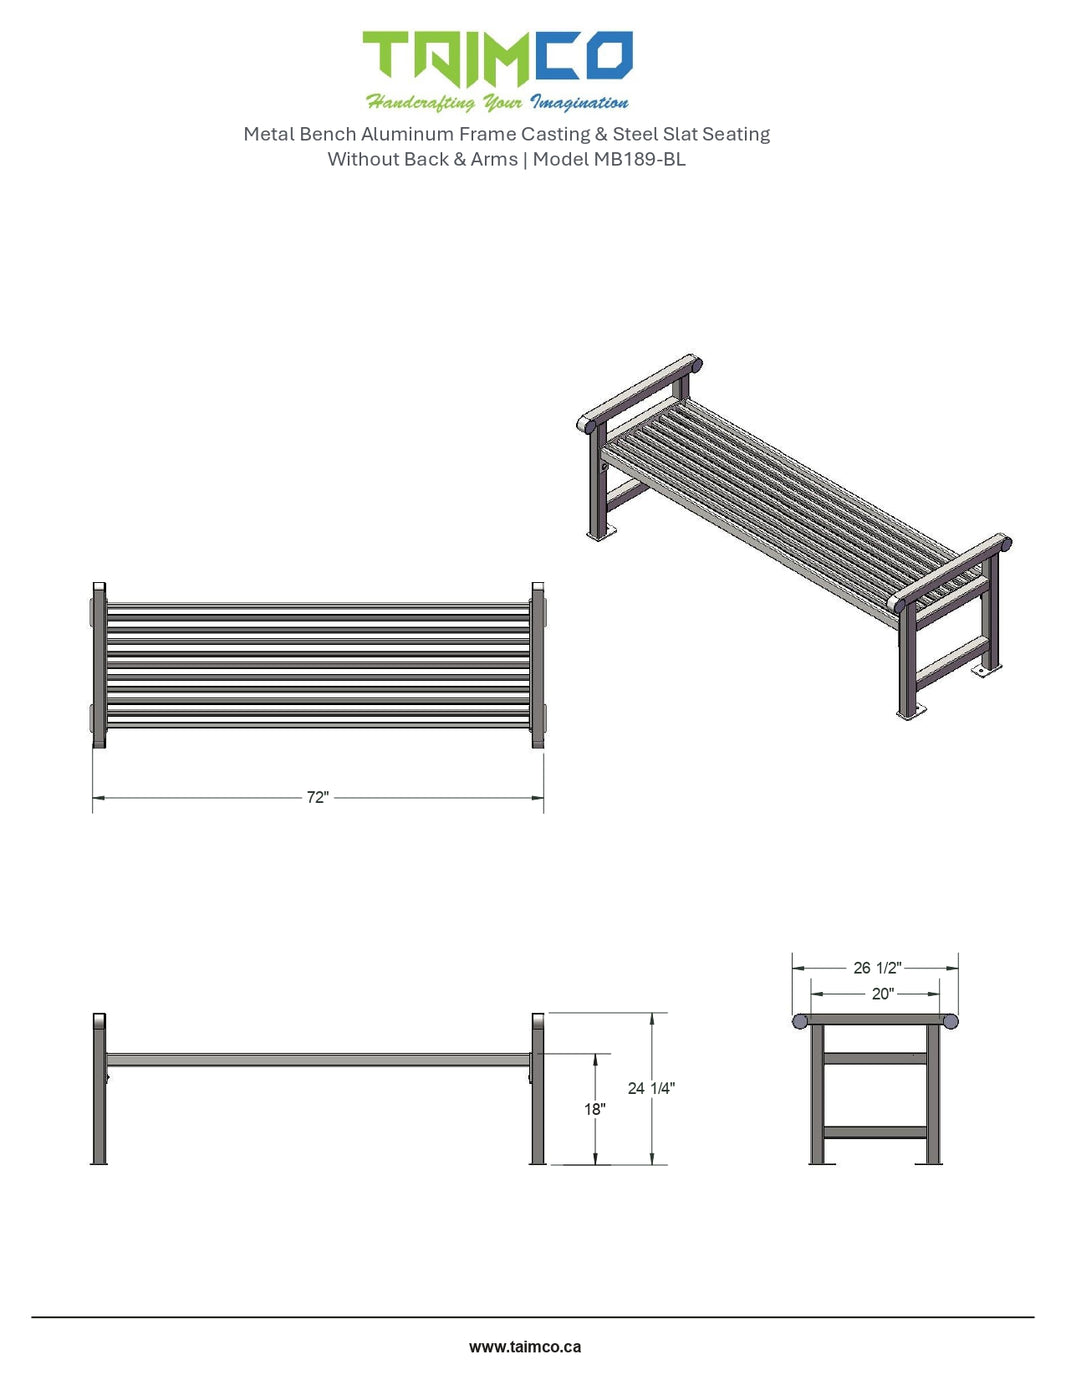 Metal Bench Aluminum Frame Casting & Steel Slat Seating | Without Back & Arms | Model MB189-BL-Taimco